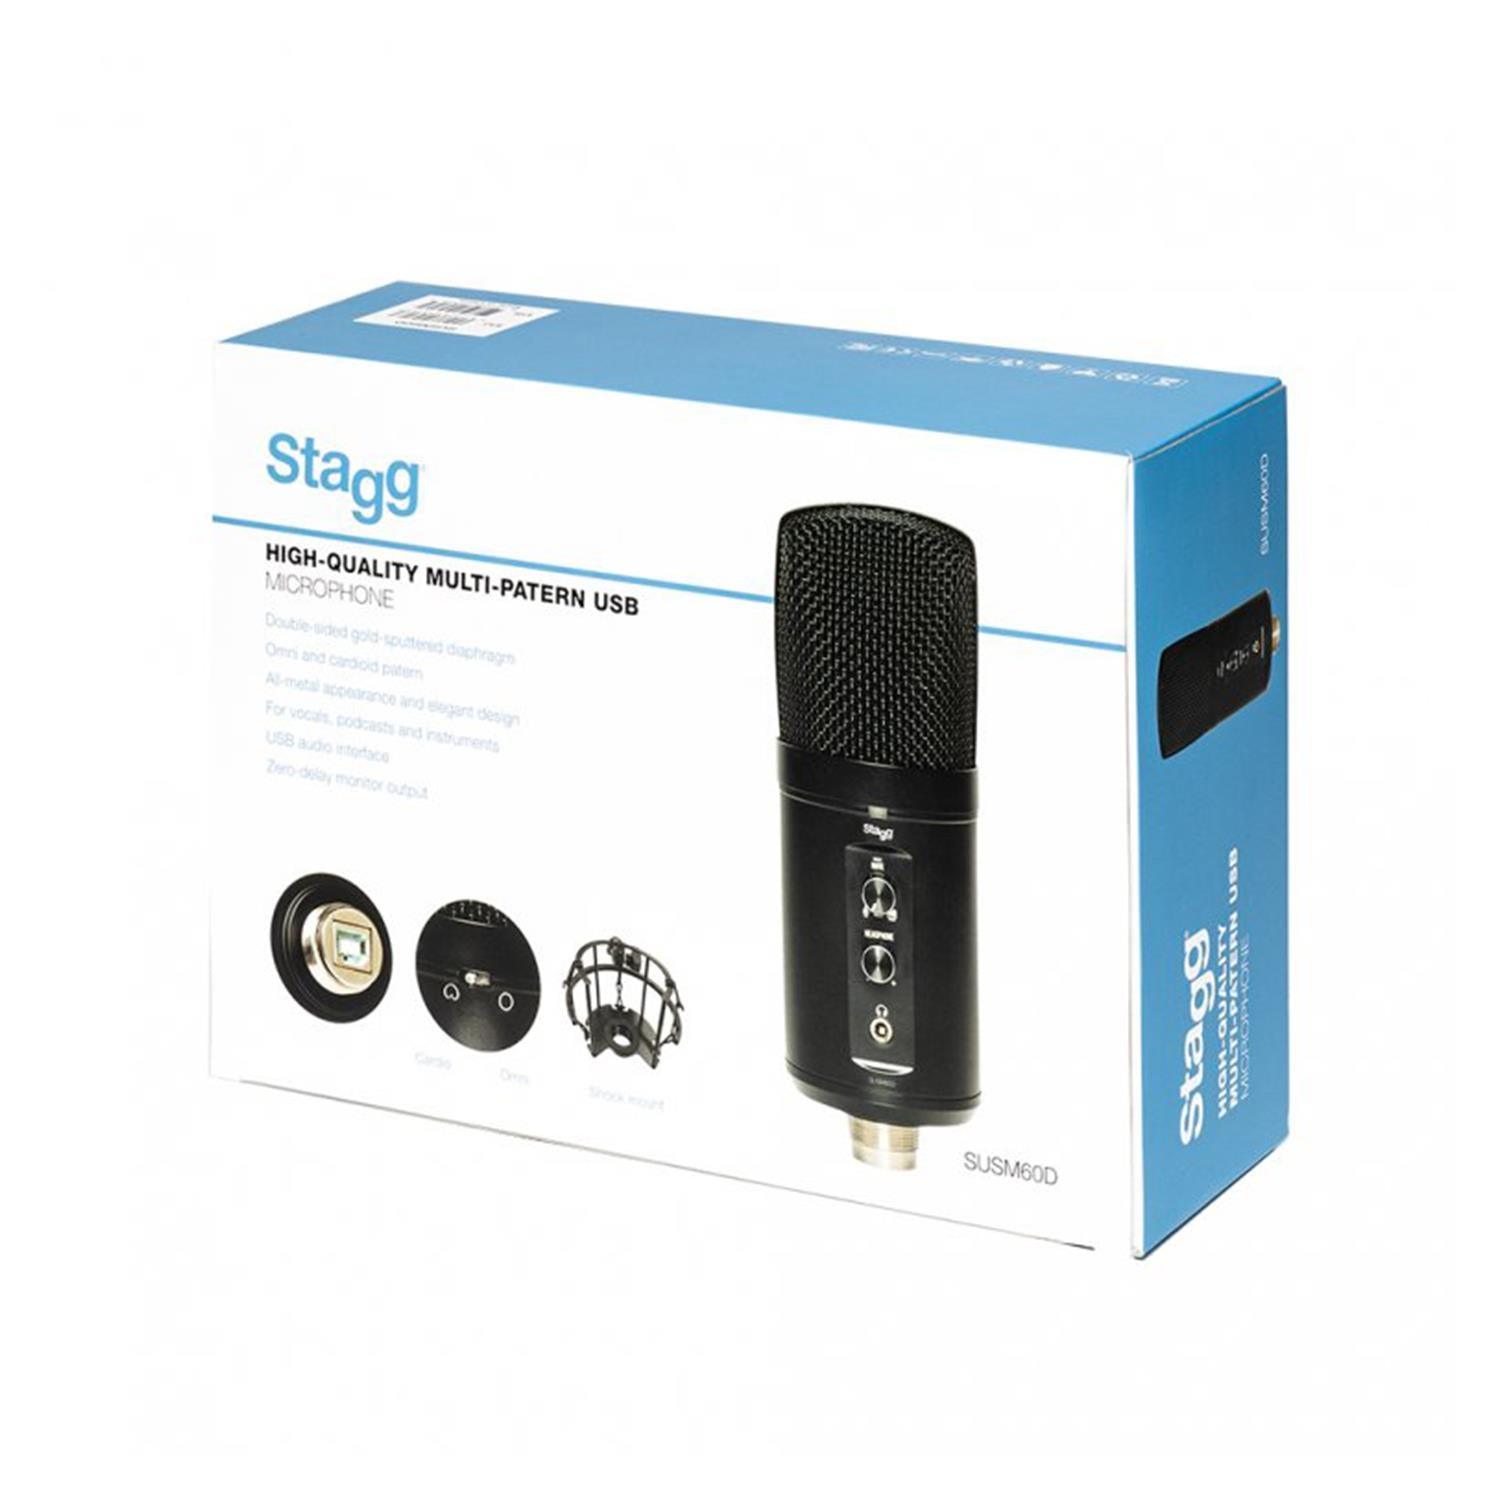 Stagg SUSM60D USB Double Condenser Microphone - DY Pro Audio